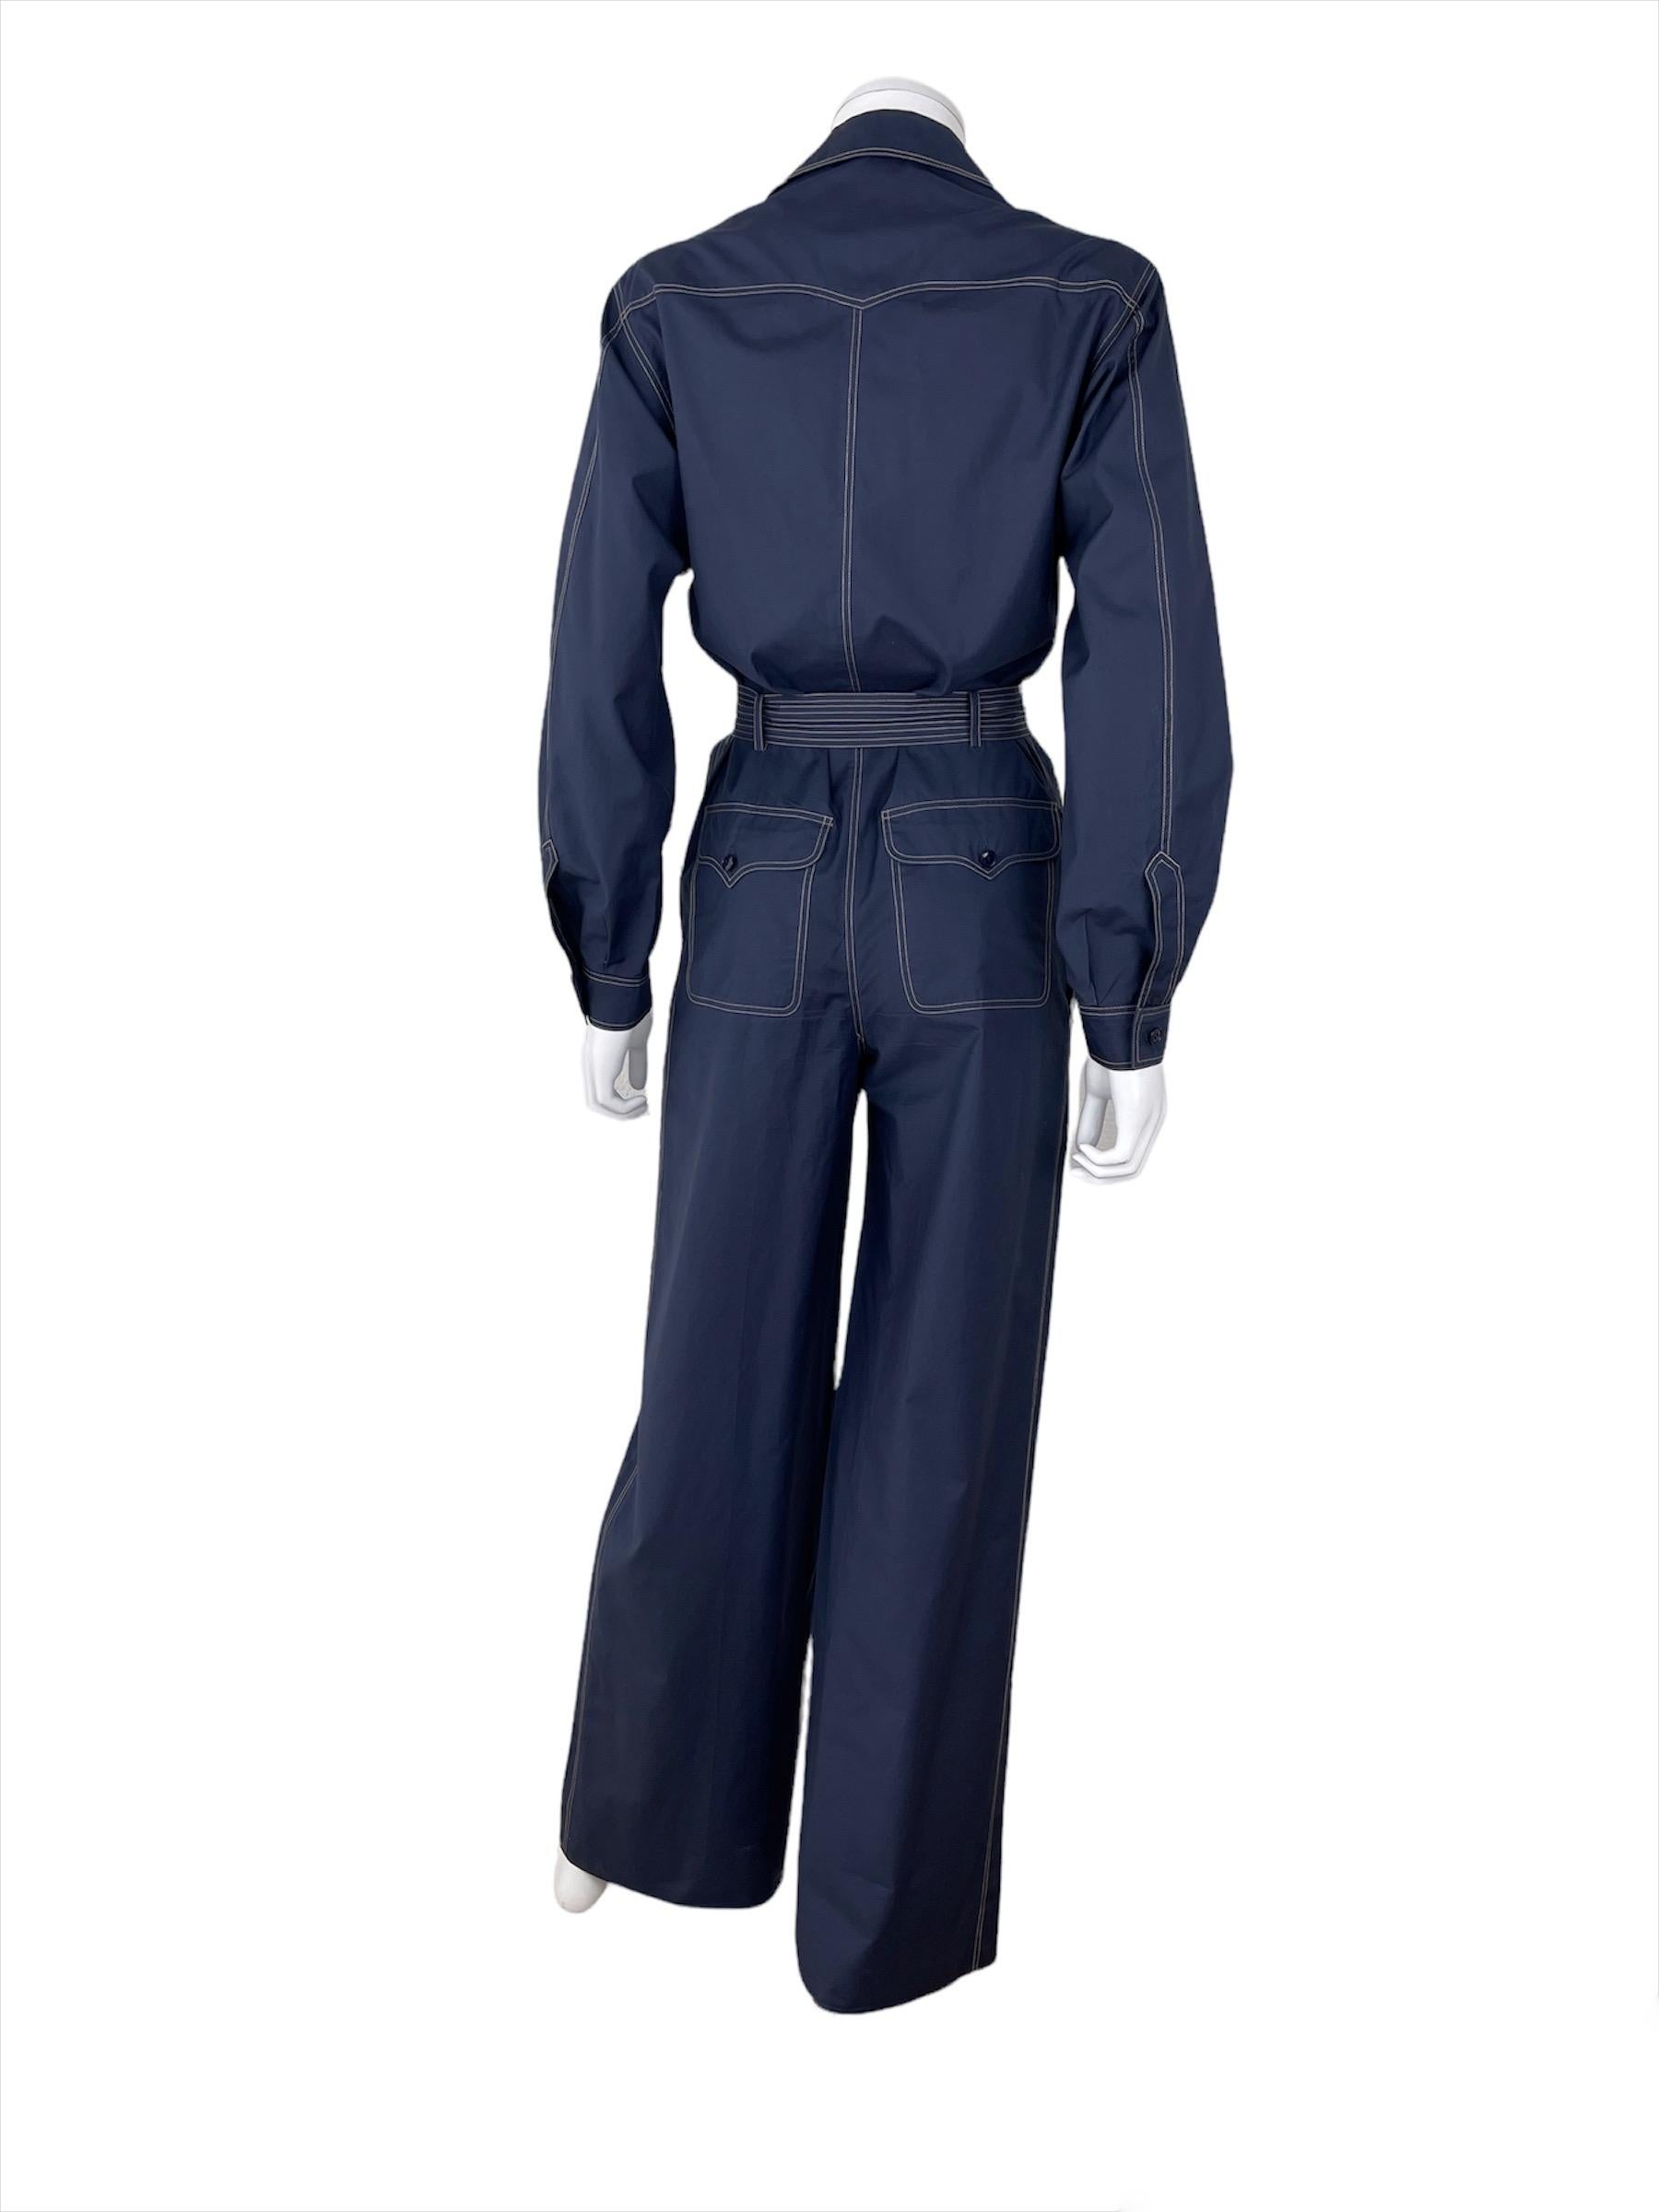 SAINT LAURENT Rive Gauche, Made in France, circa 70’s.

Beautiful Saint Laurent Rive Gauche belted jumpsuit in navy blue cotton.
Sides pockets. No lining. 

A wonderful piece of archive ! 
Size tag is 38 (vintage french) - I recommend it for a Small